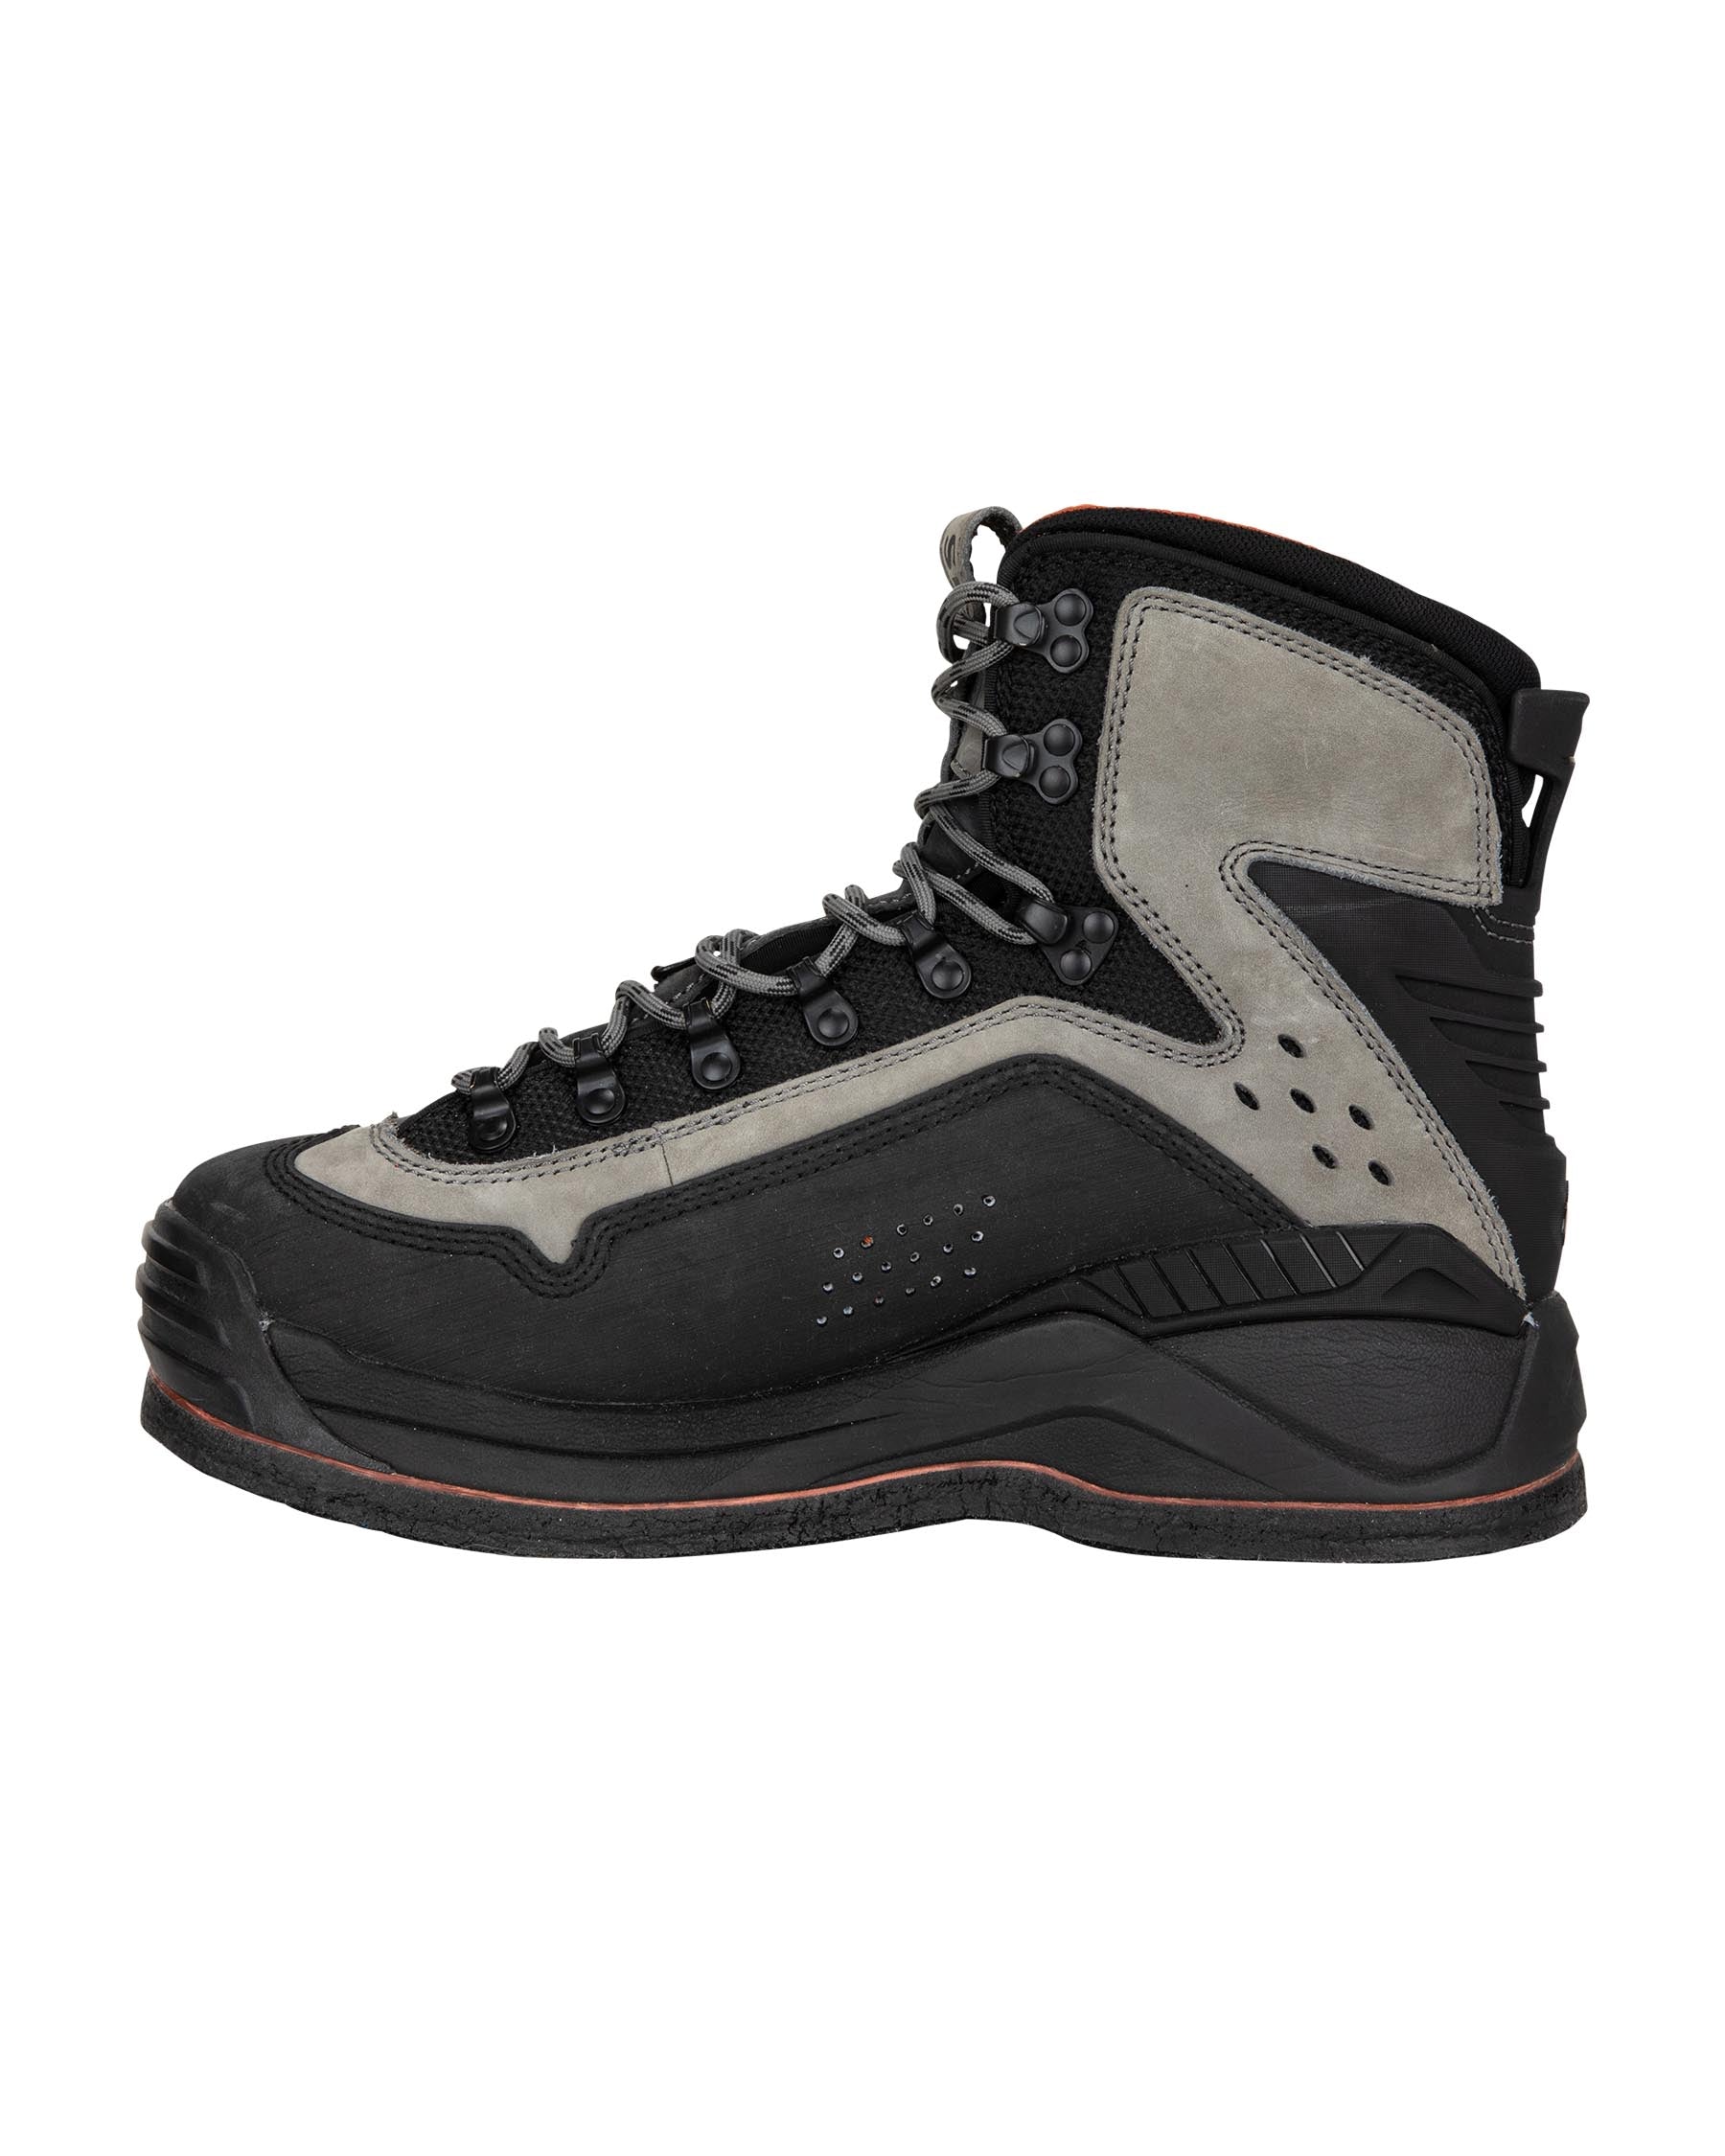 Simms G3 Guide Wading Boots -  Felt Soles